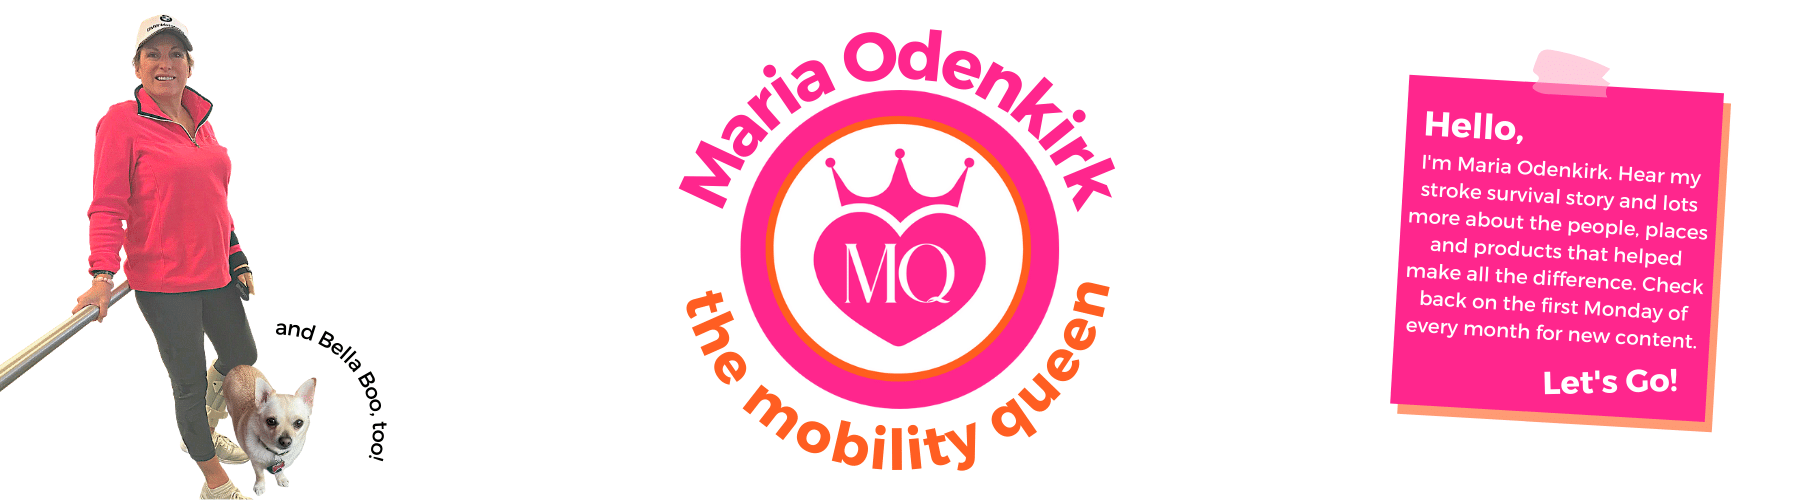 Maria Odenkirk. The Mobility Queen.